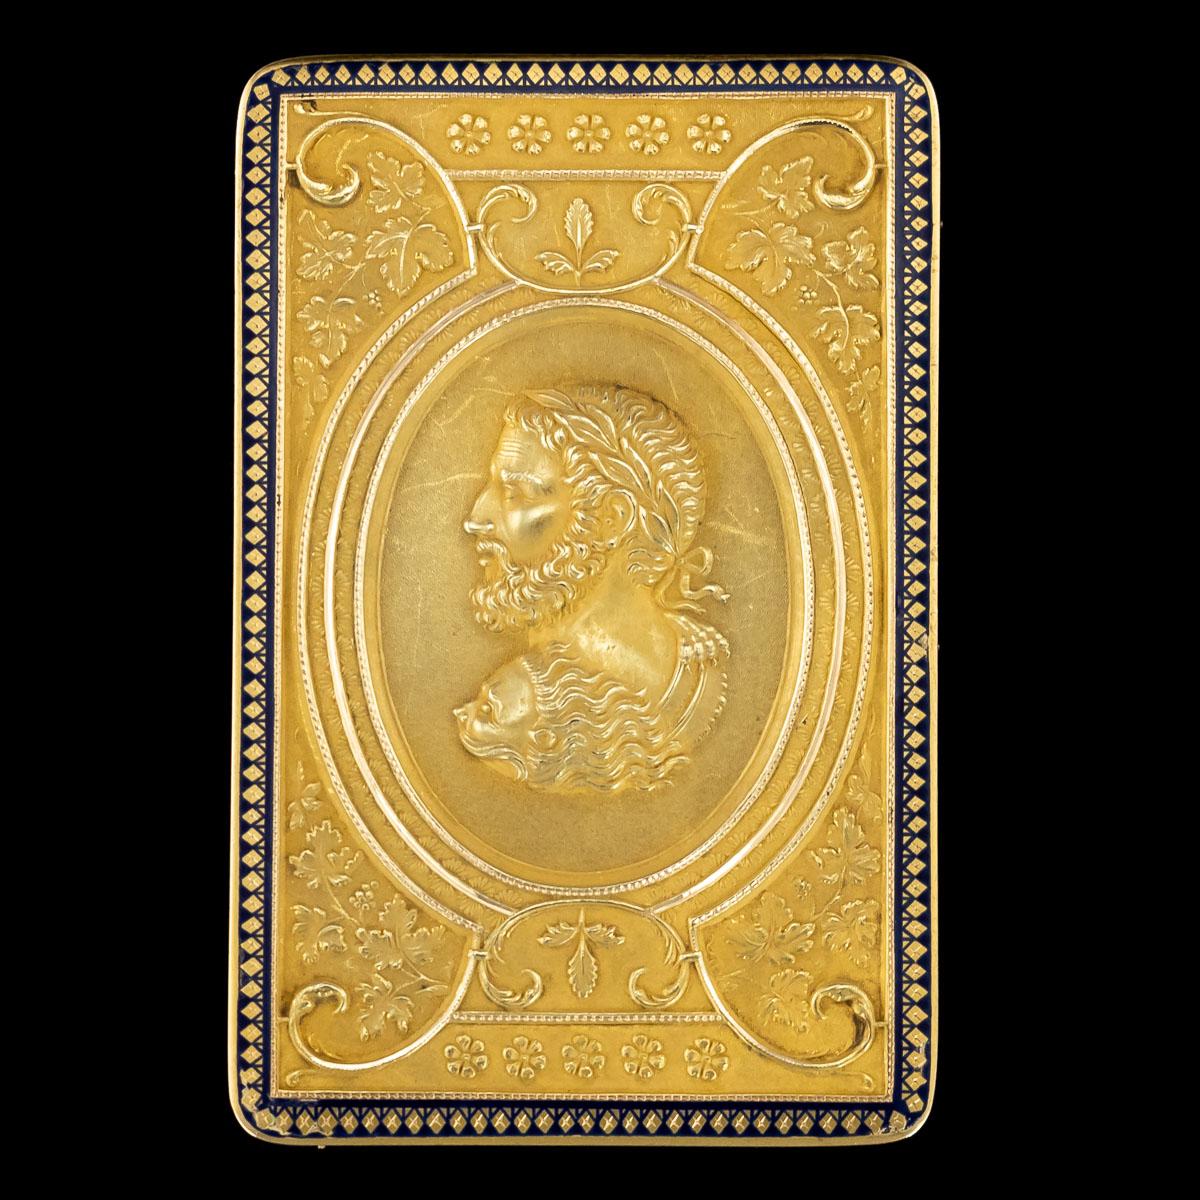 Antique early 19th century Swiss 18-karat gold and enamel snuff box, of traditional rectangular shape with rounded corners, the cover inset with a matte gold panel chased with the raised head of a Roman Emperor (Commodus, often depicted with a lion